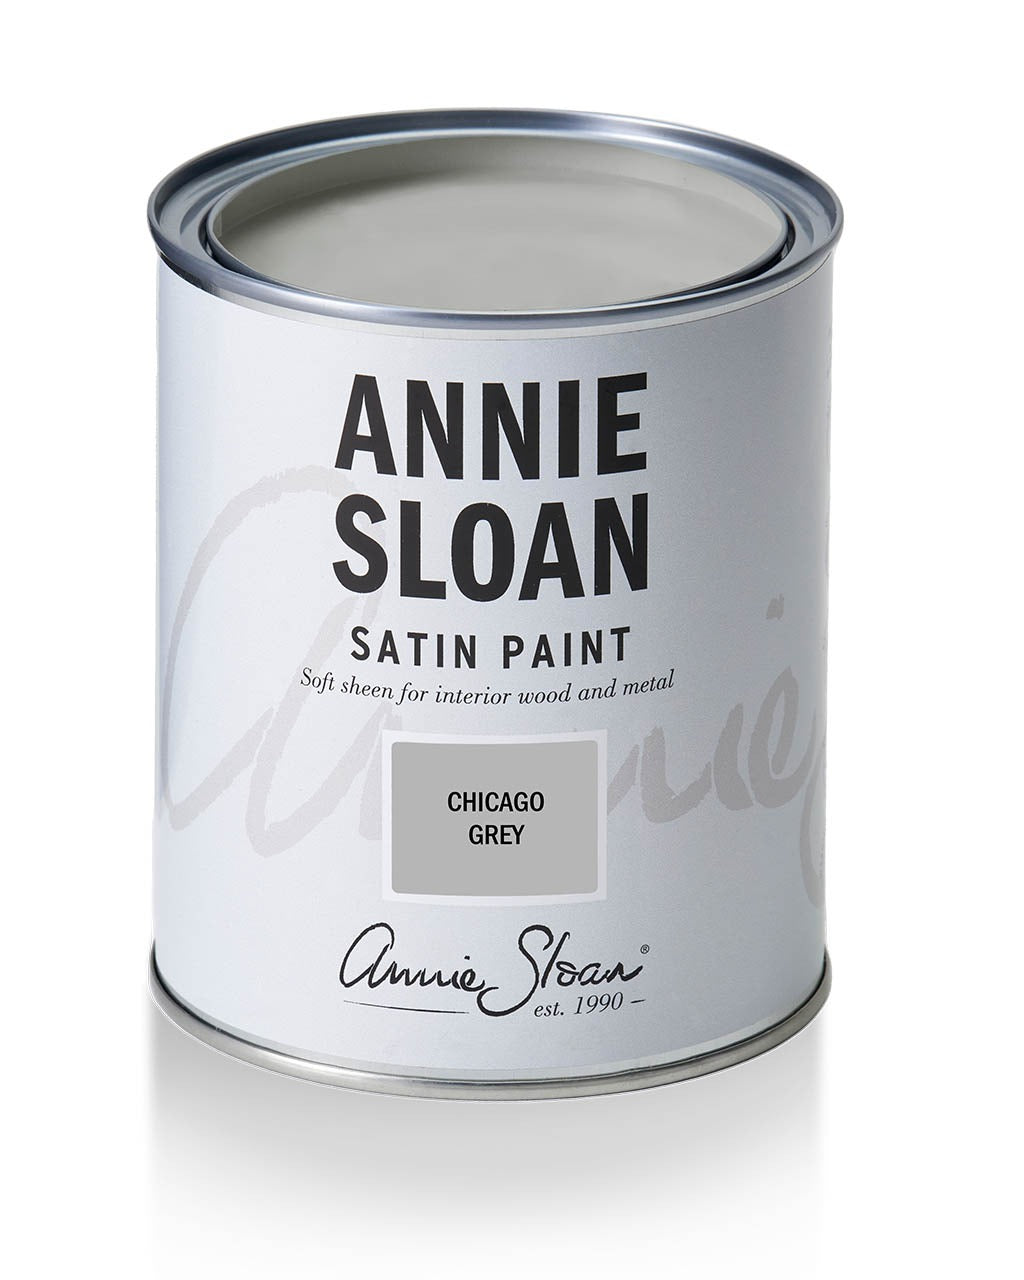 Chicago Grey Satin Paint by Annie Sloan